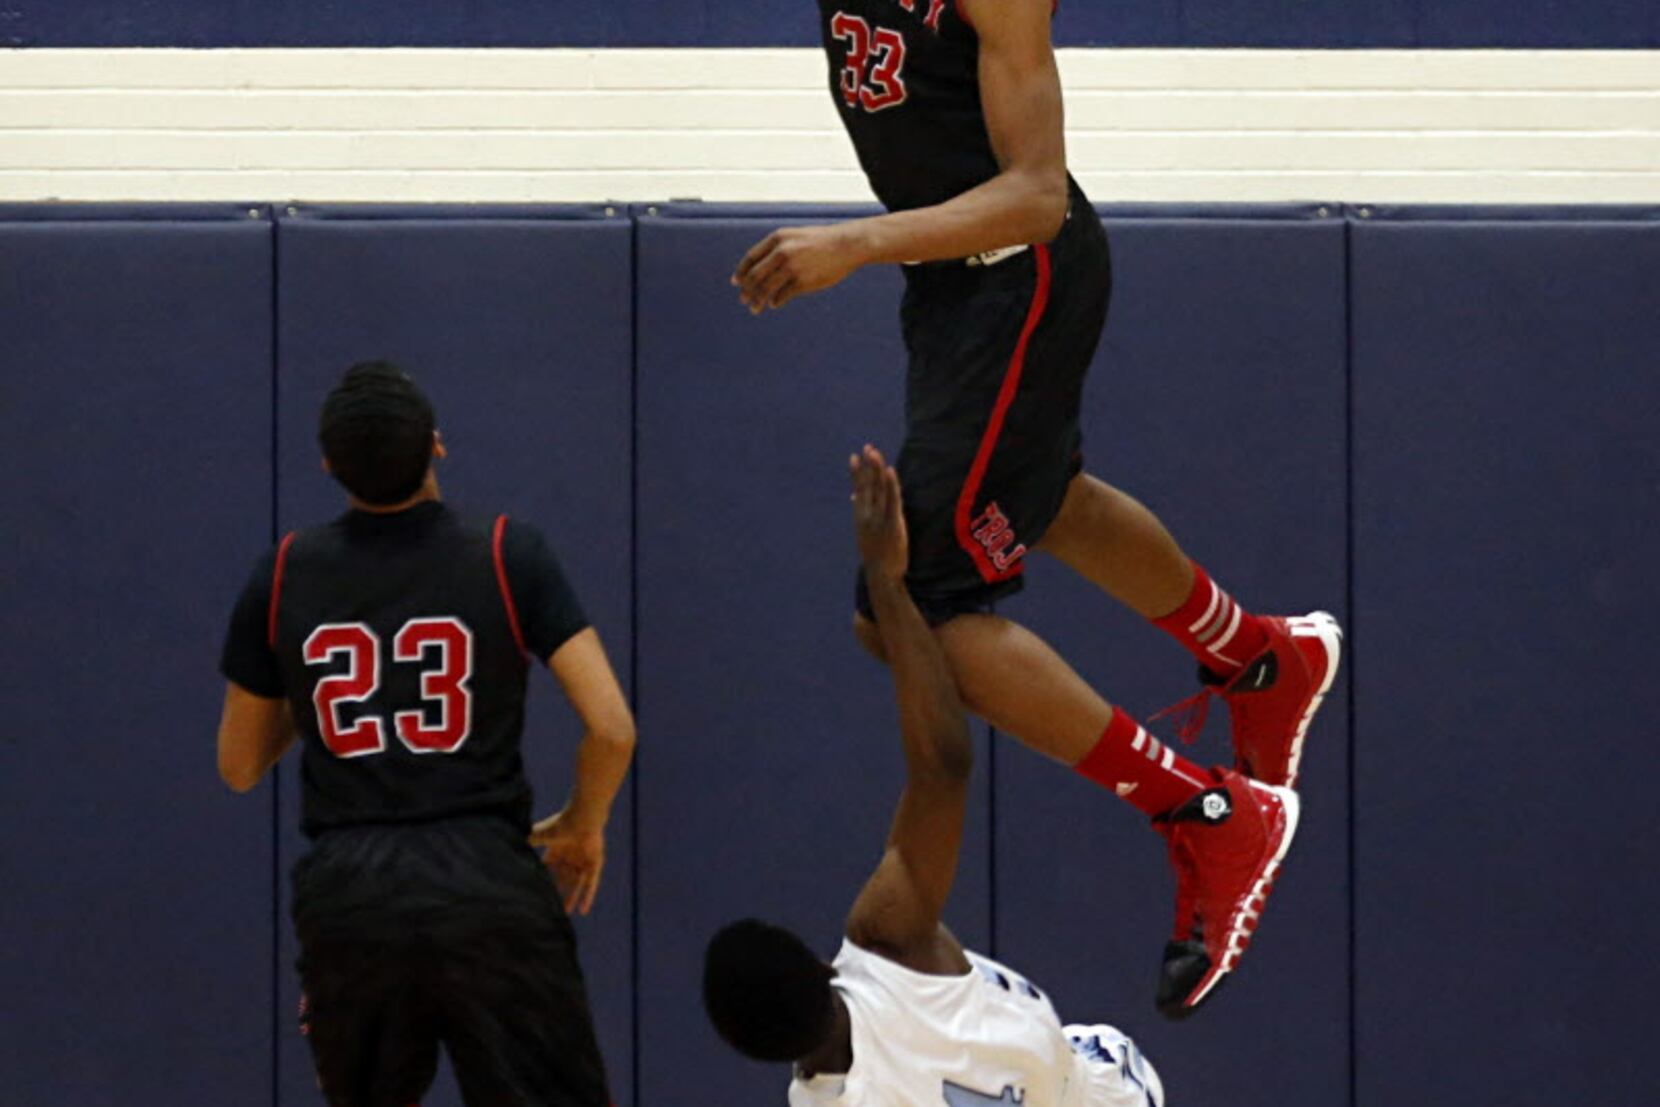 Euless Trinity's Myles Turner is nation's most sought-after recruit, yet  late bloomer still developing